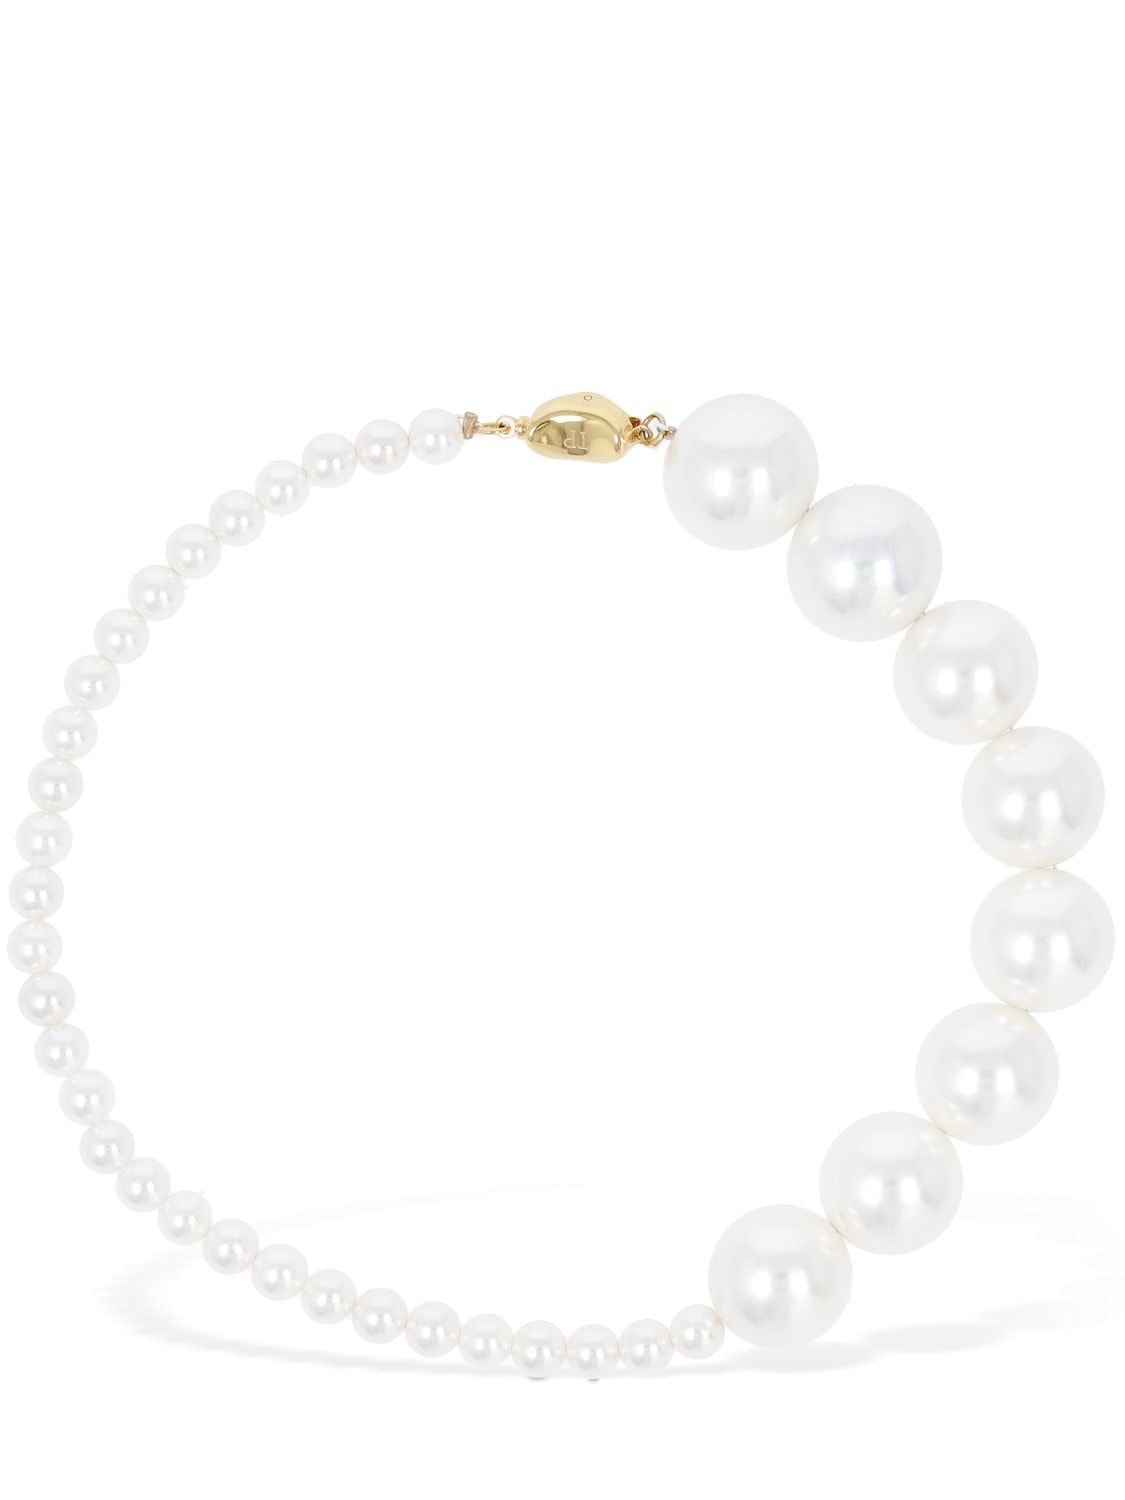 Image of Gradient Pearl Collar Necklace